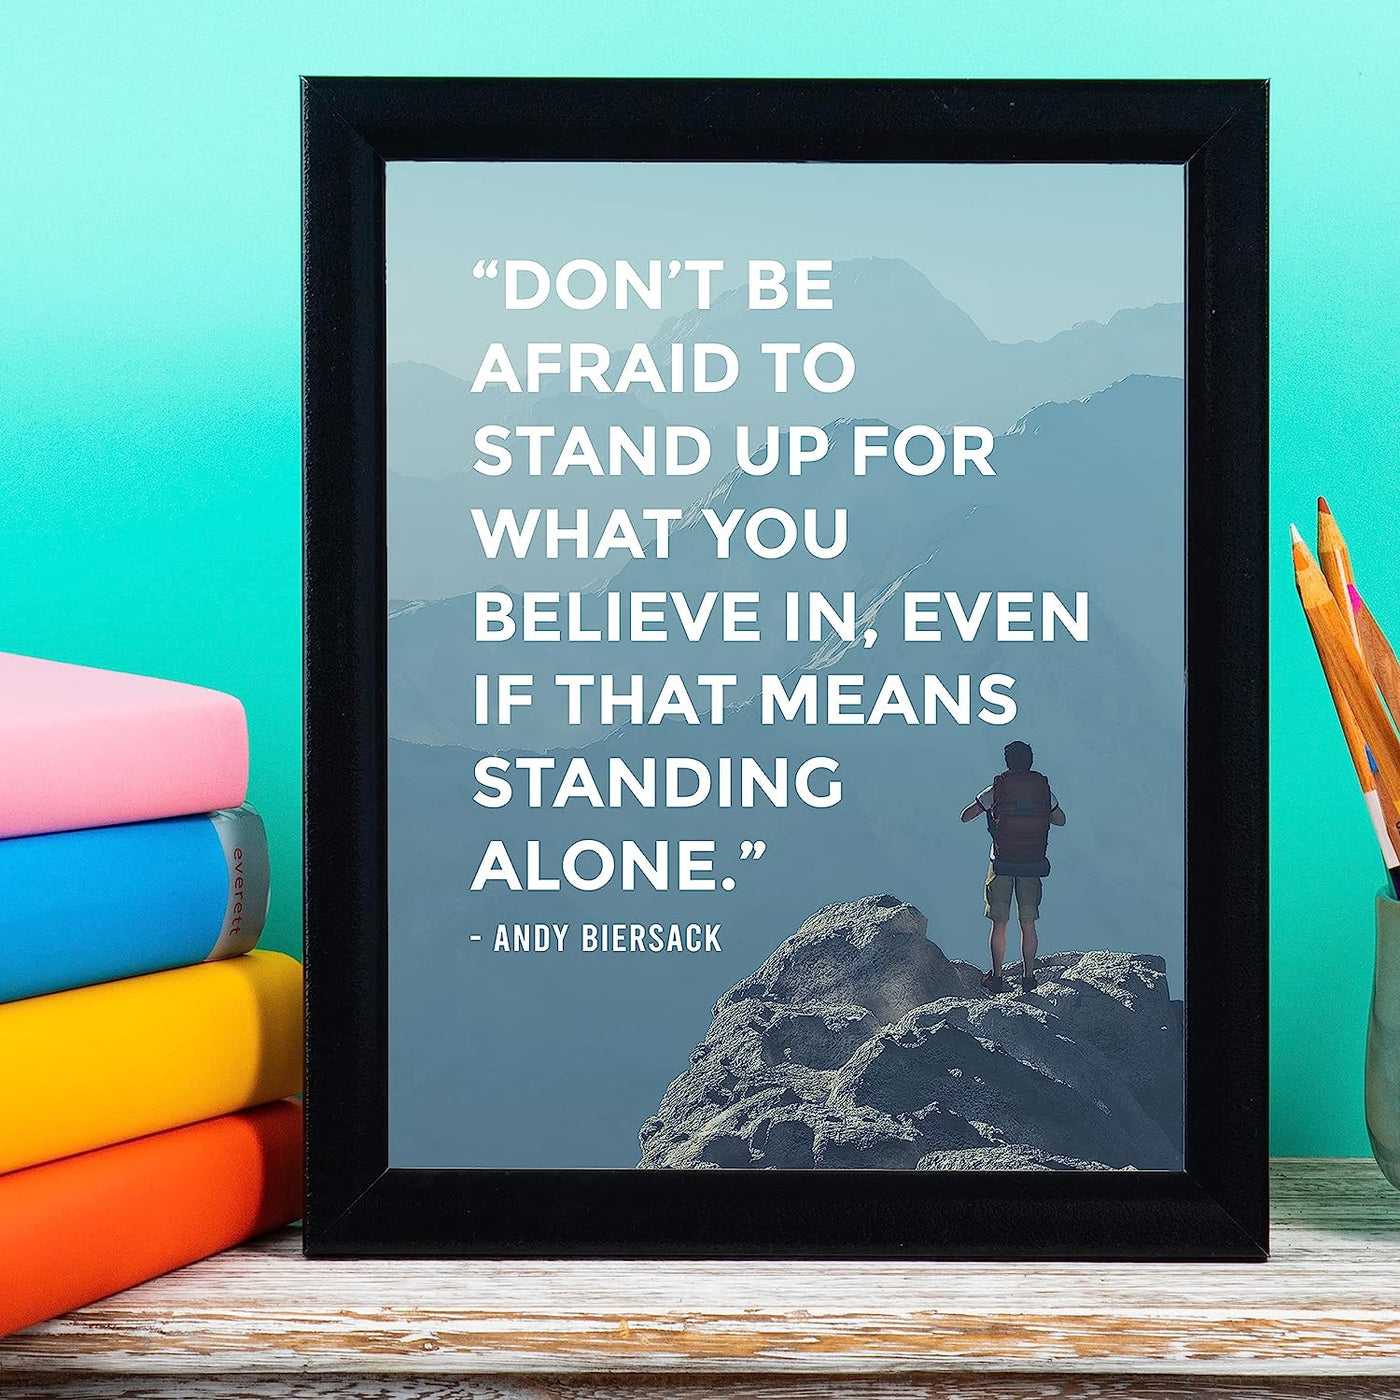 Don't Be Afraid to Stand Up For What You Believe In Inspirational Wall Art -8 x 10" Motivational Photo Print w/Mountains-Ready to Frame. Home-Office-School Decor. Great Sign for Inspiration!